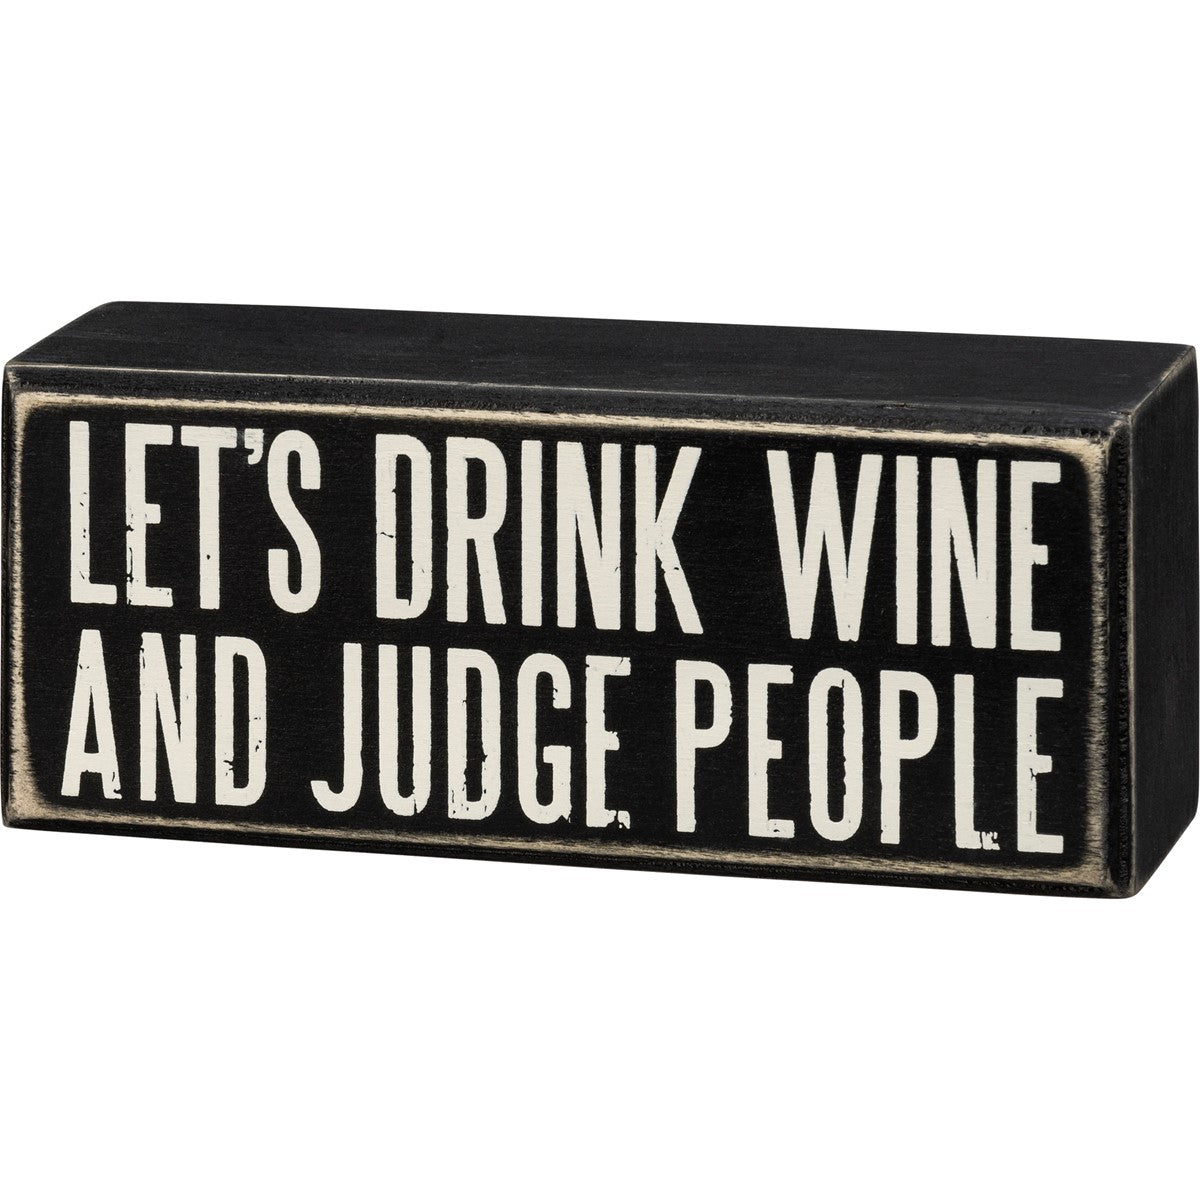 "LET'S DRINK WINE AND JUDGE PEOPLE" BOX SIGN